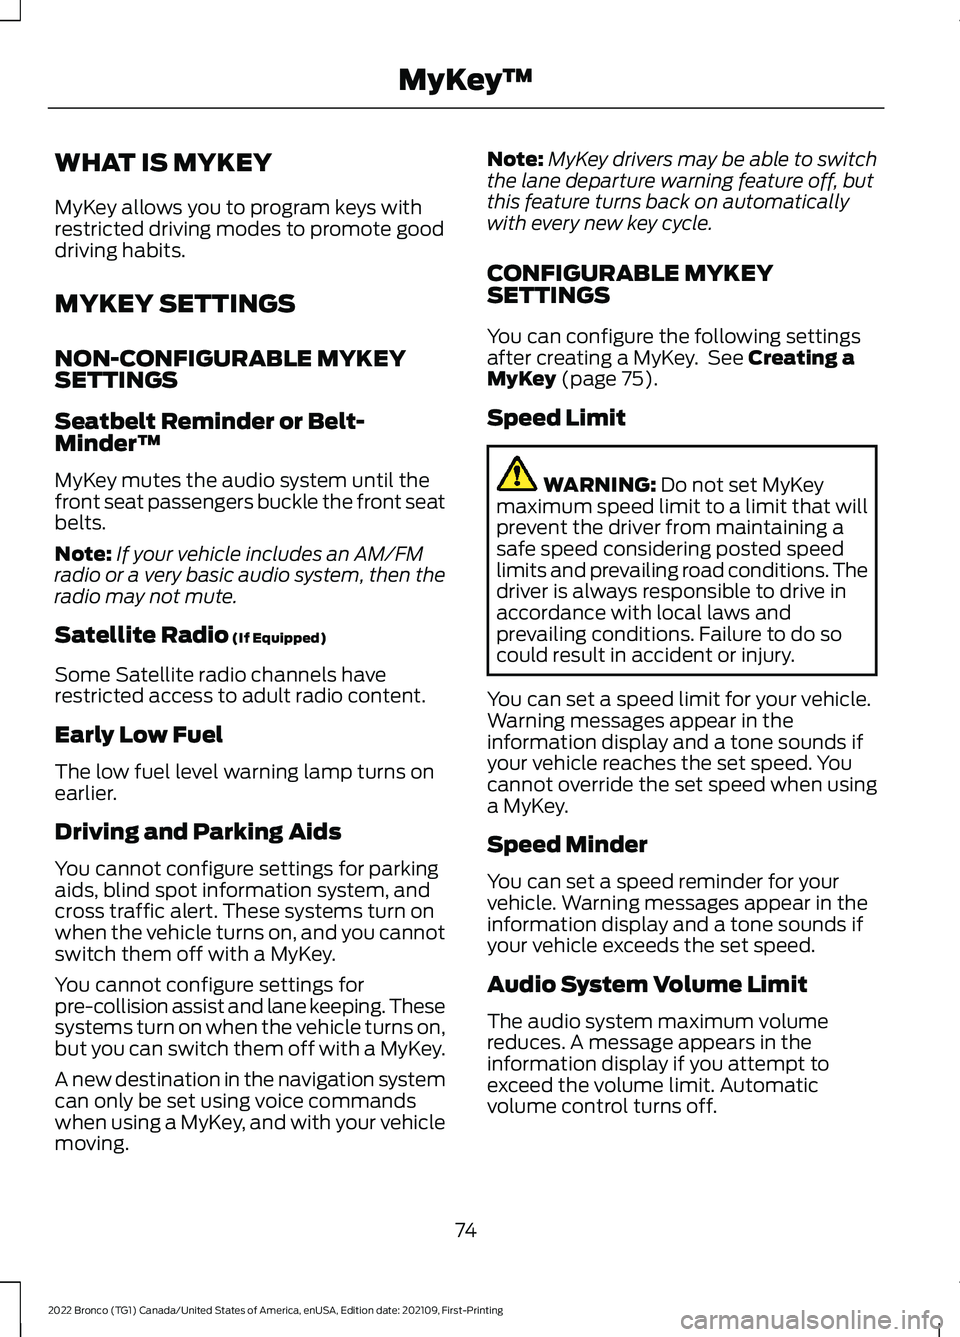 FORD BRONCO 2022  Owners Manual WHAT IS MYKEY
MyKey allows you to program keys withrestricted driving modes to promote gooddriving habits.
MYKEY SETTINGS
NON-CONFIGURABLE MYKEYSETTINGS
Seatbelt Reminder or Belt-Minder™
MyKey mutes